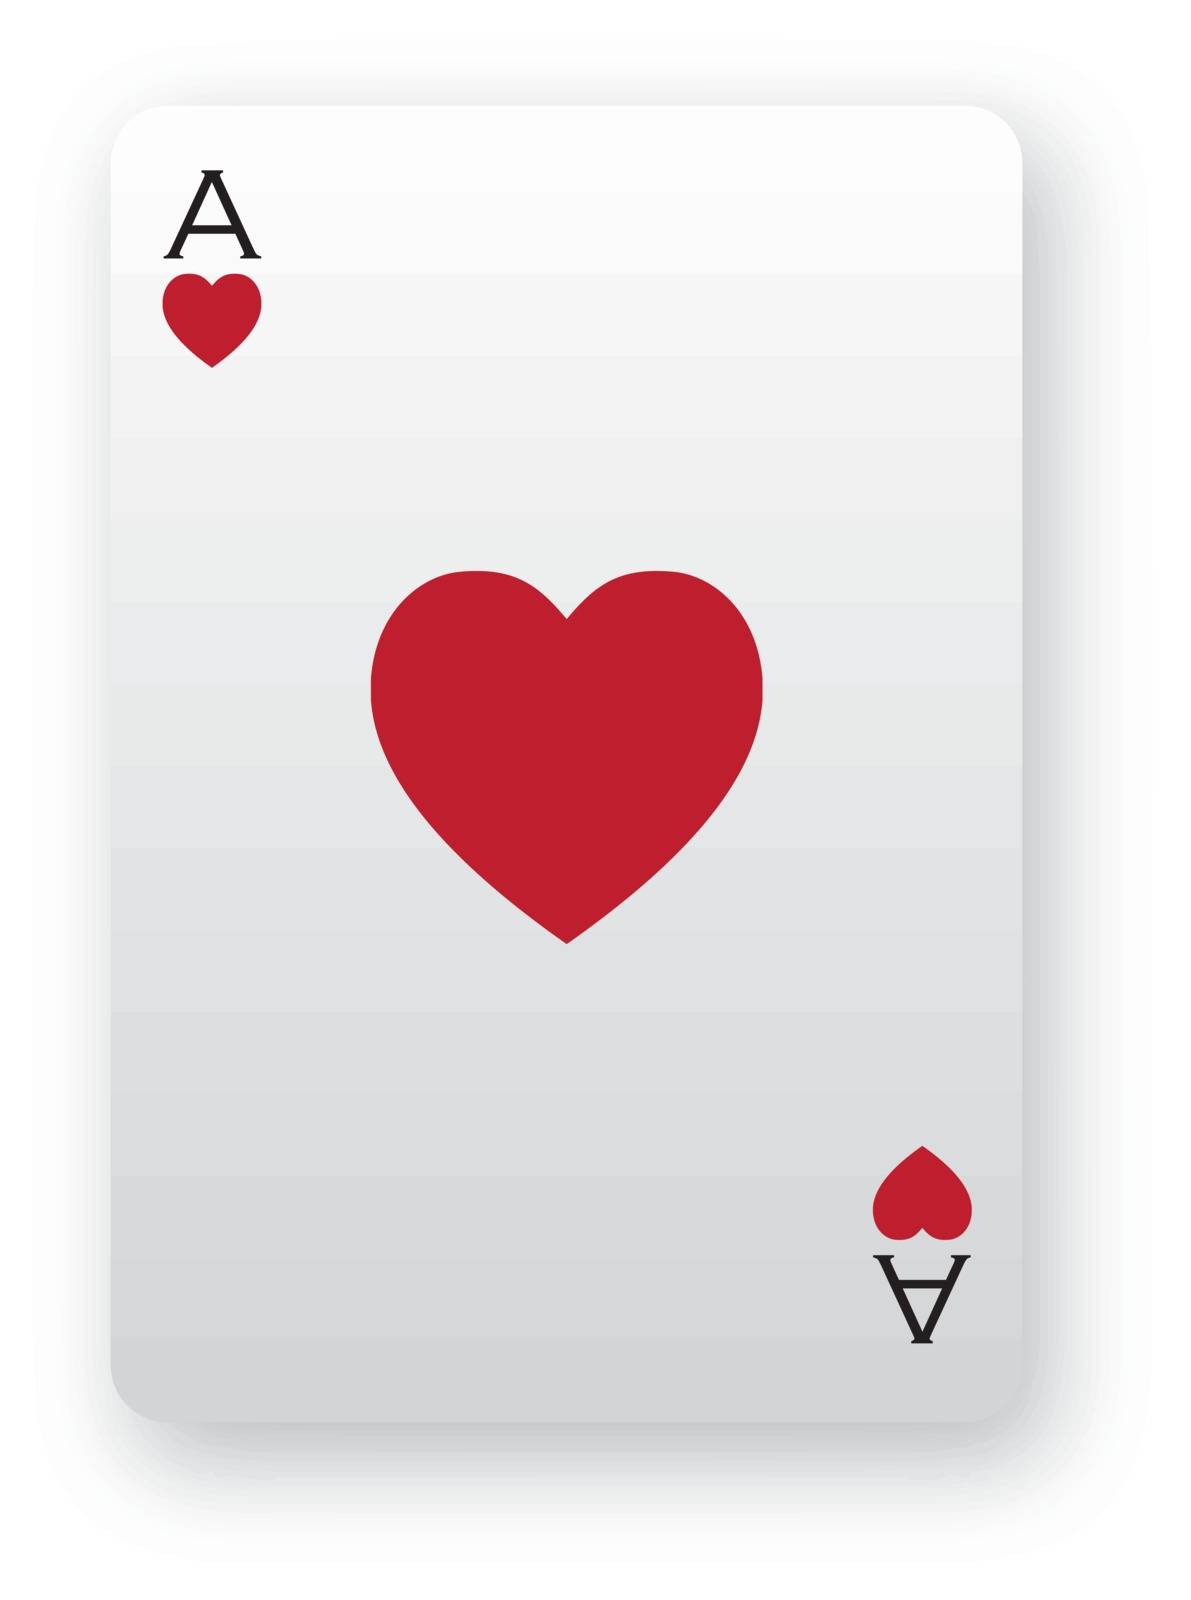 Simple Ace of hearts card illustration with soft drop shadow